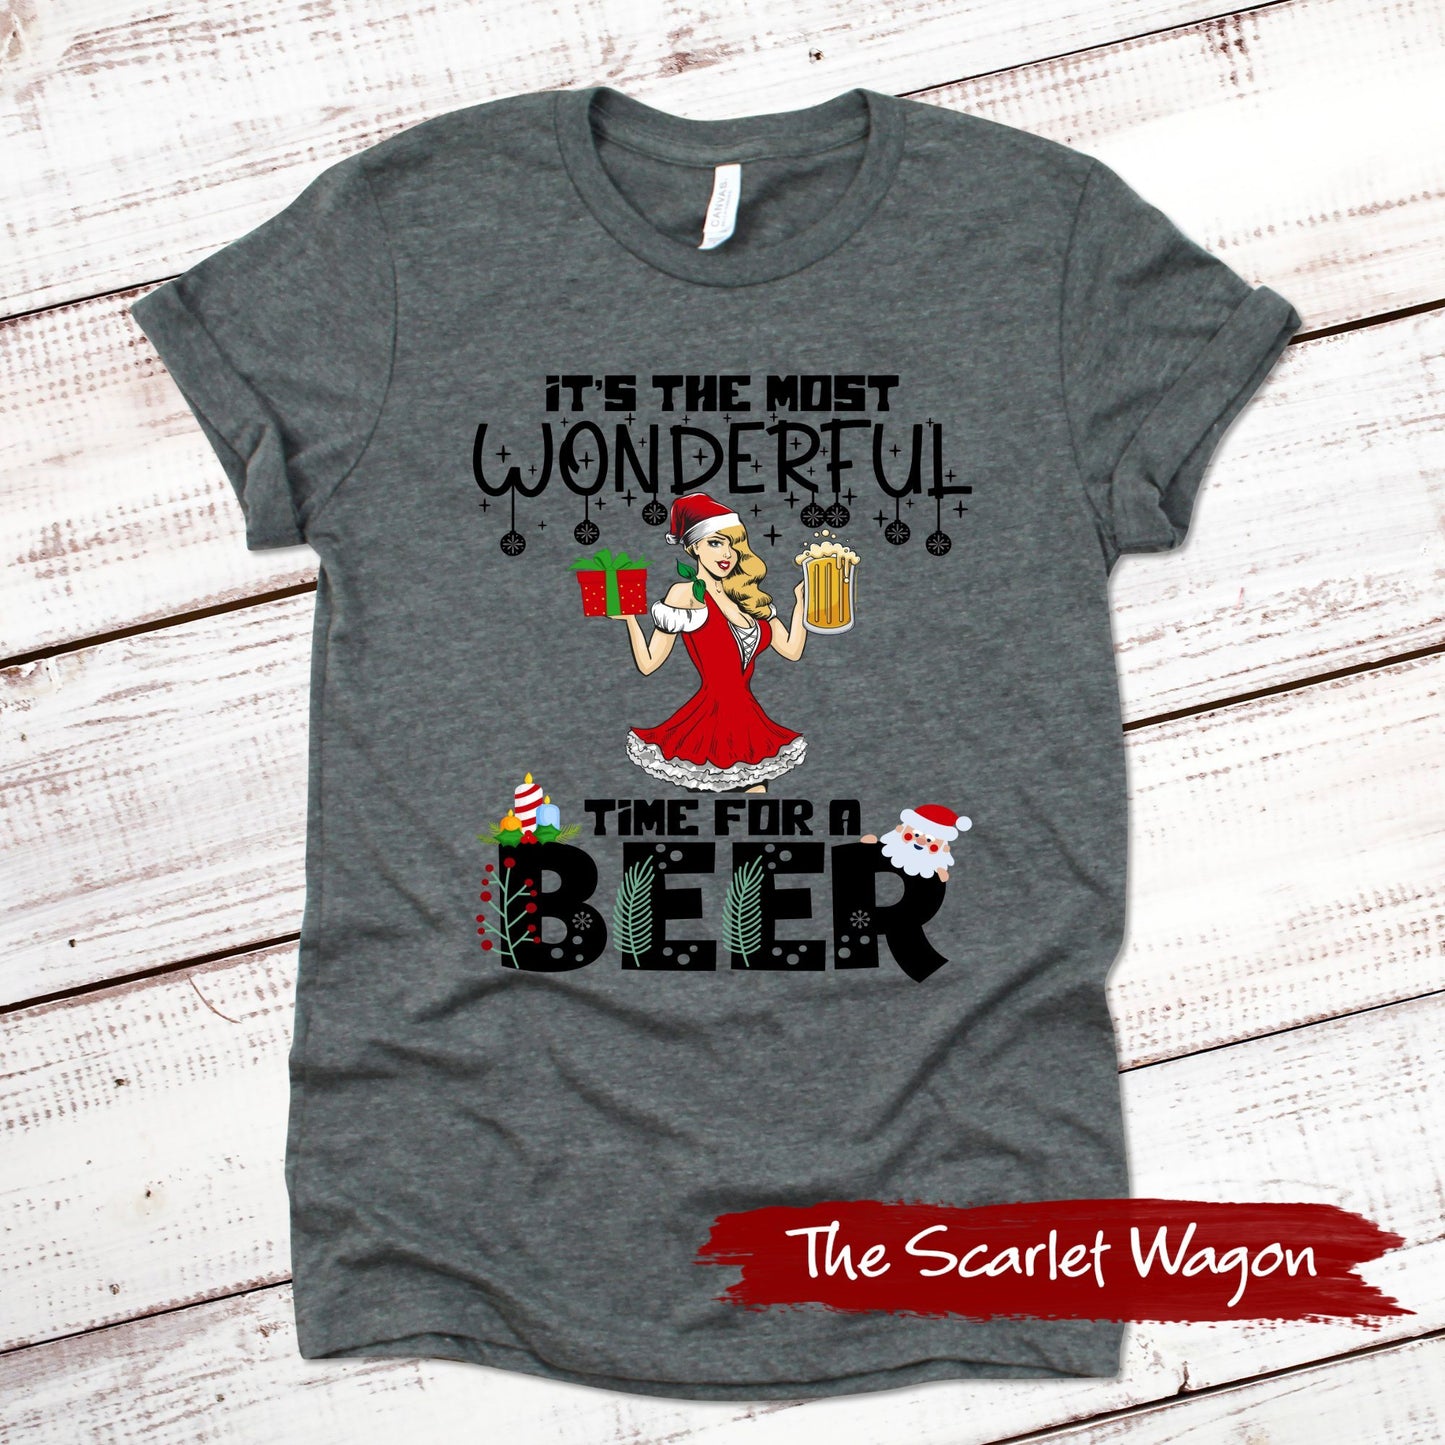 Most Wonderful Time for a Beer Christmas Shirt Scarlet Wagon Deep Heather Gray XS 